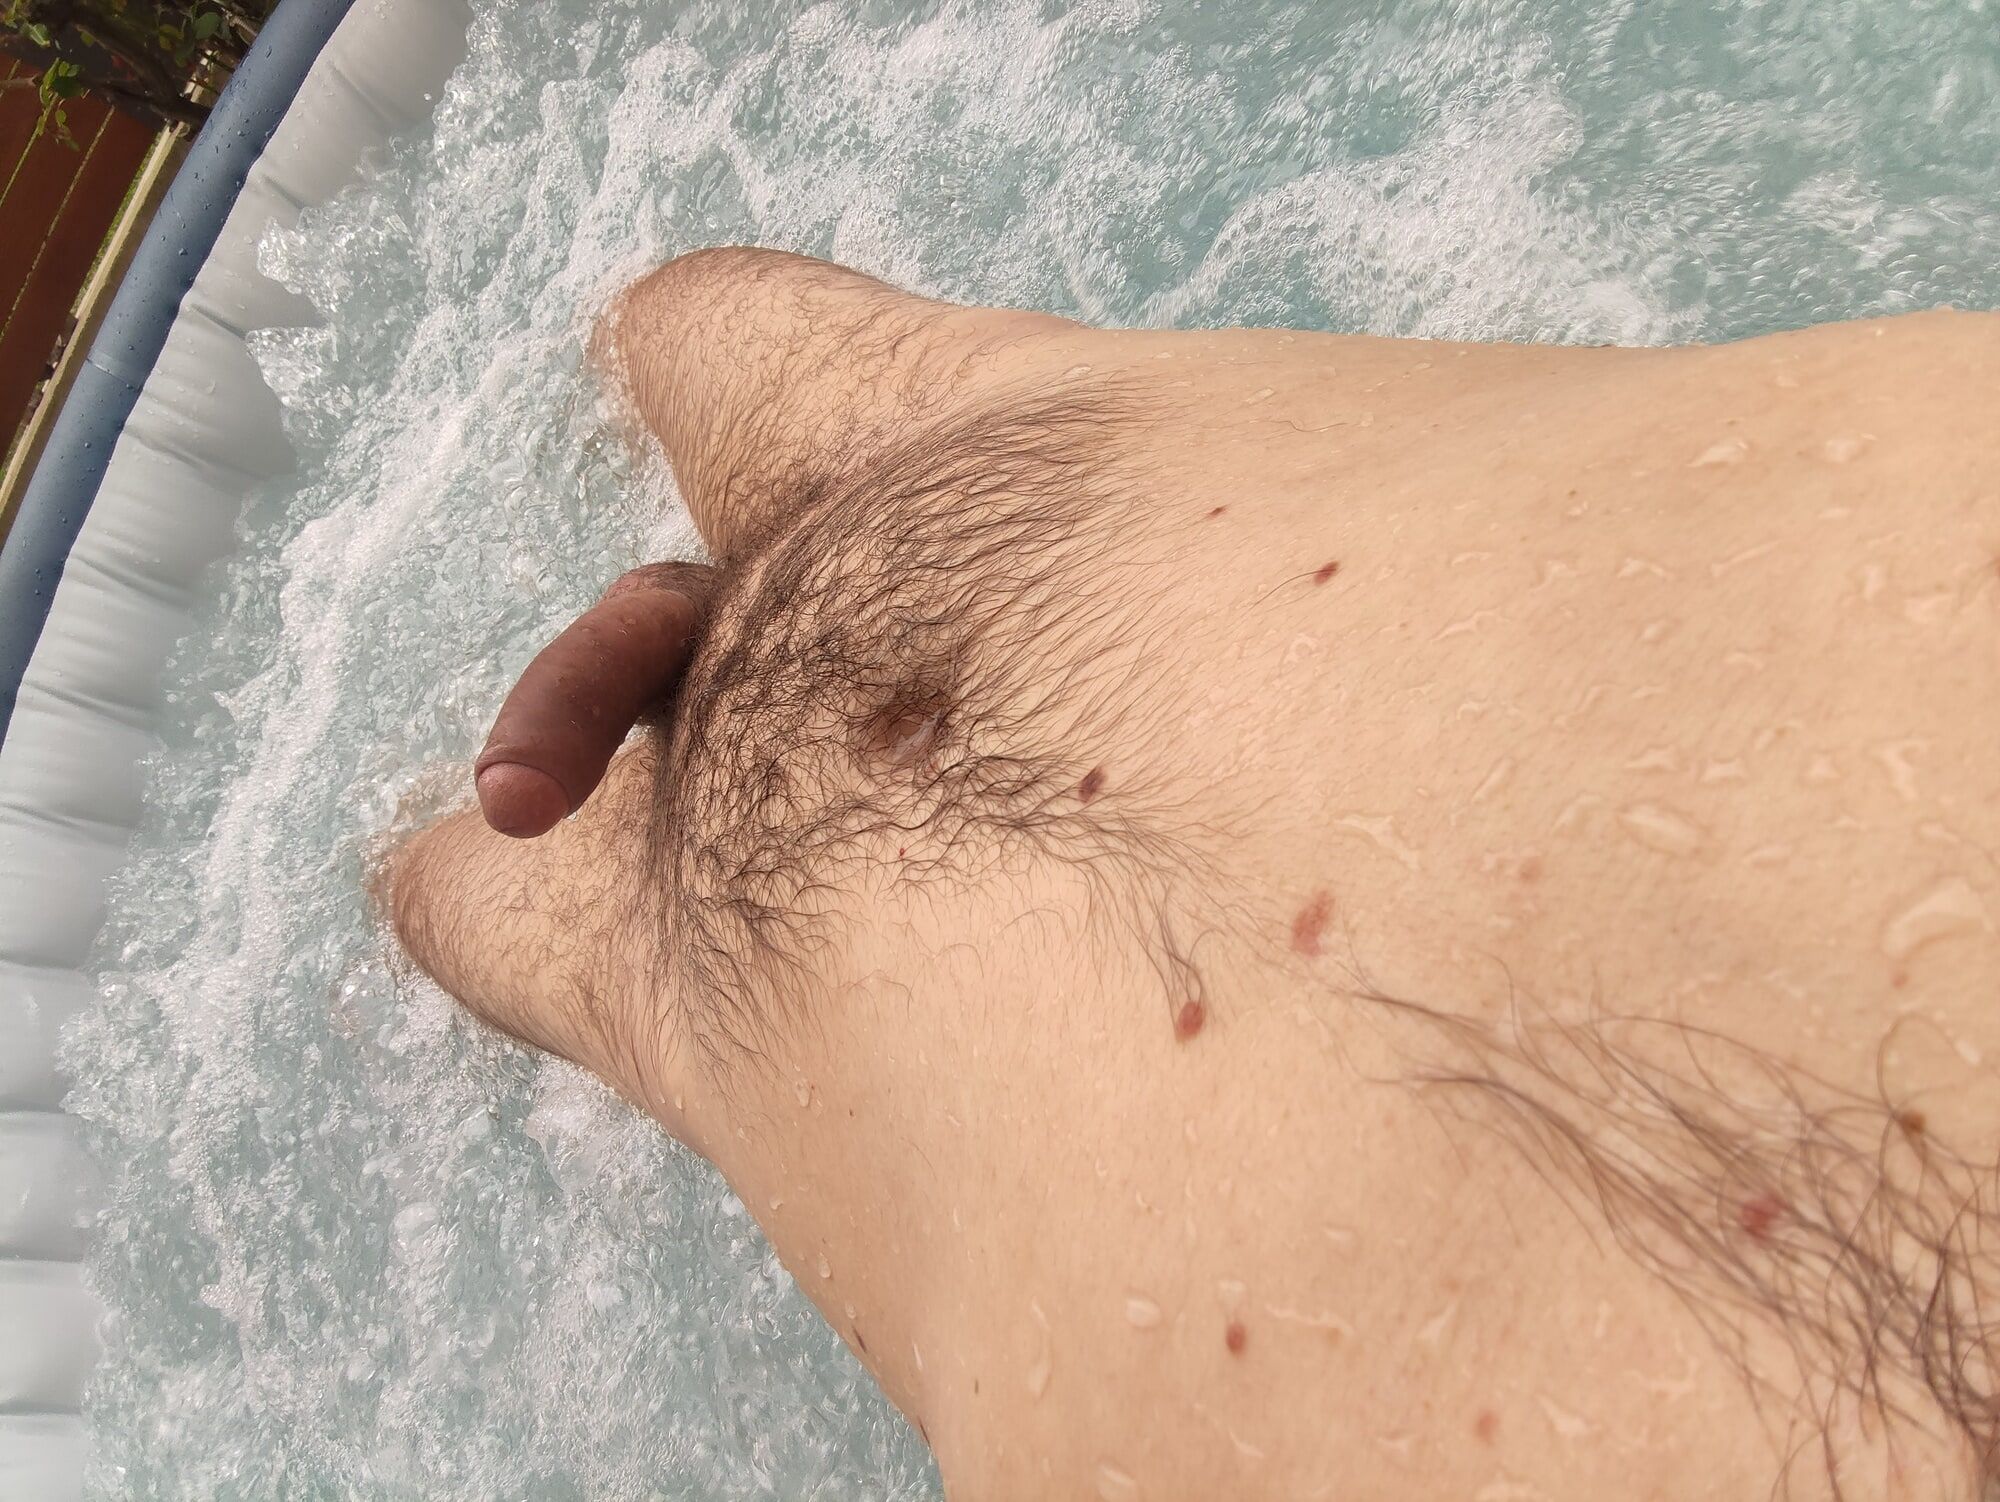 In jacuzzi showing balls and cock #5